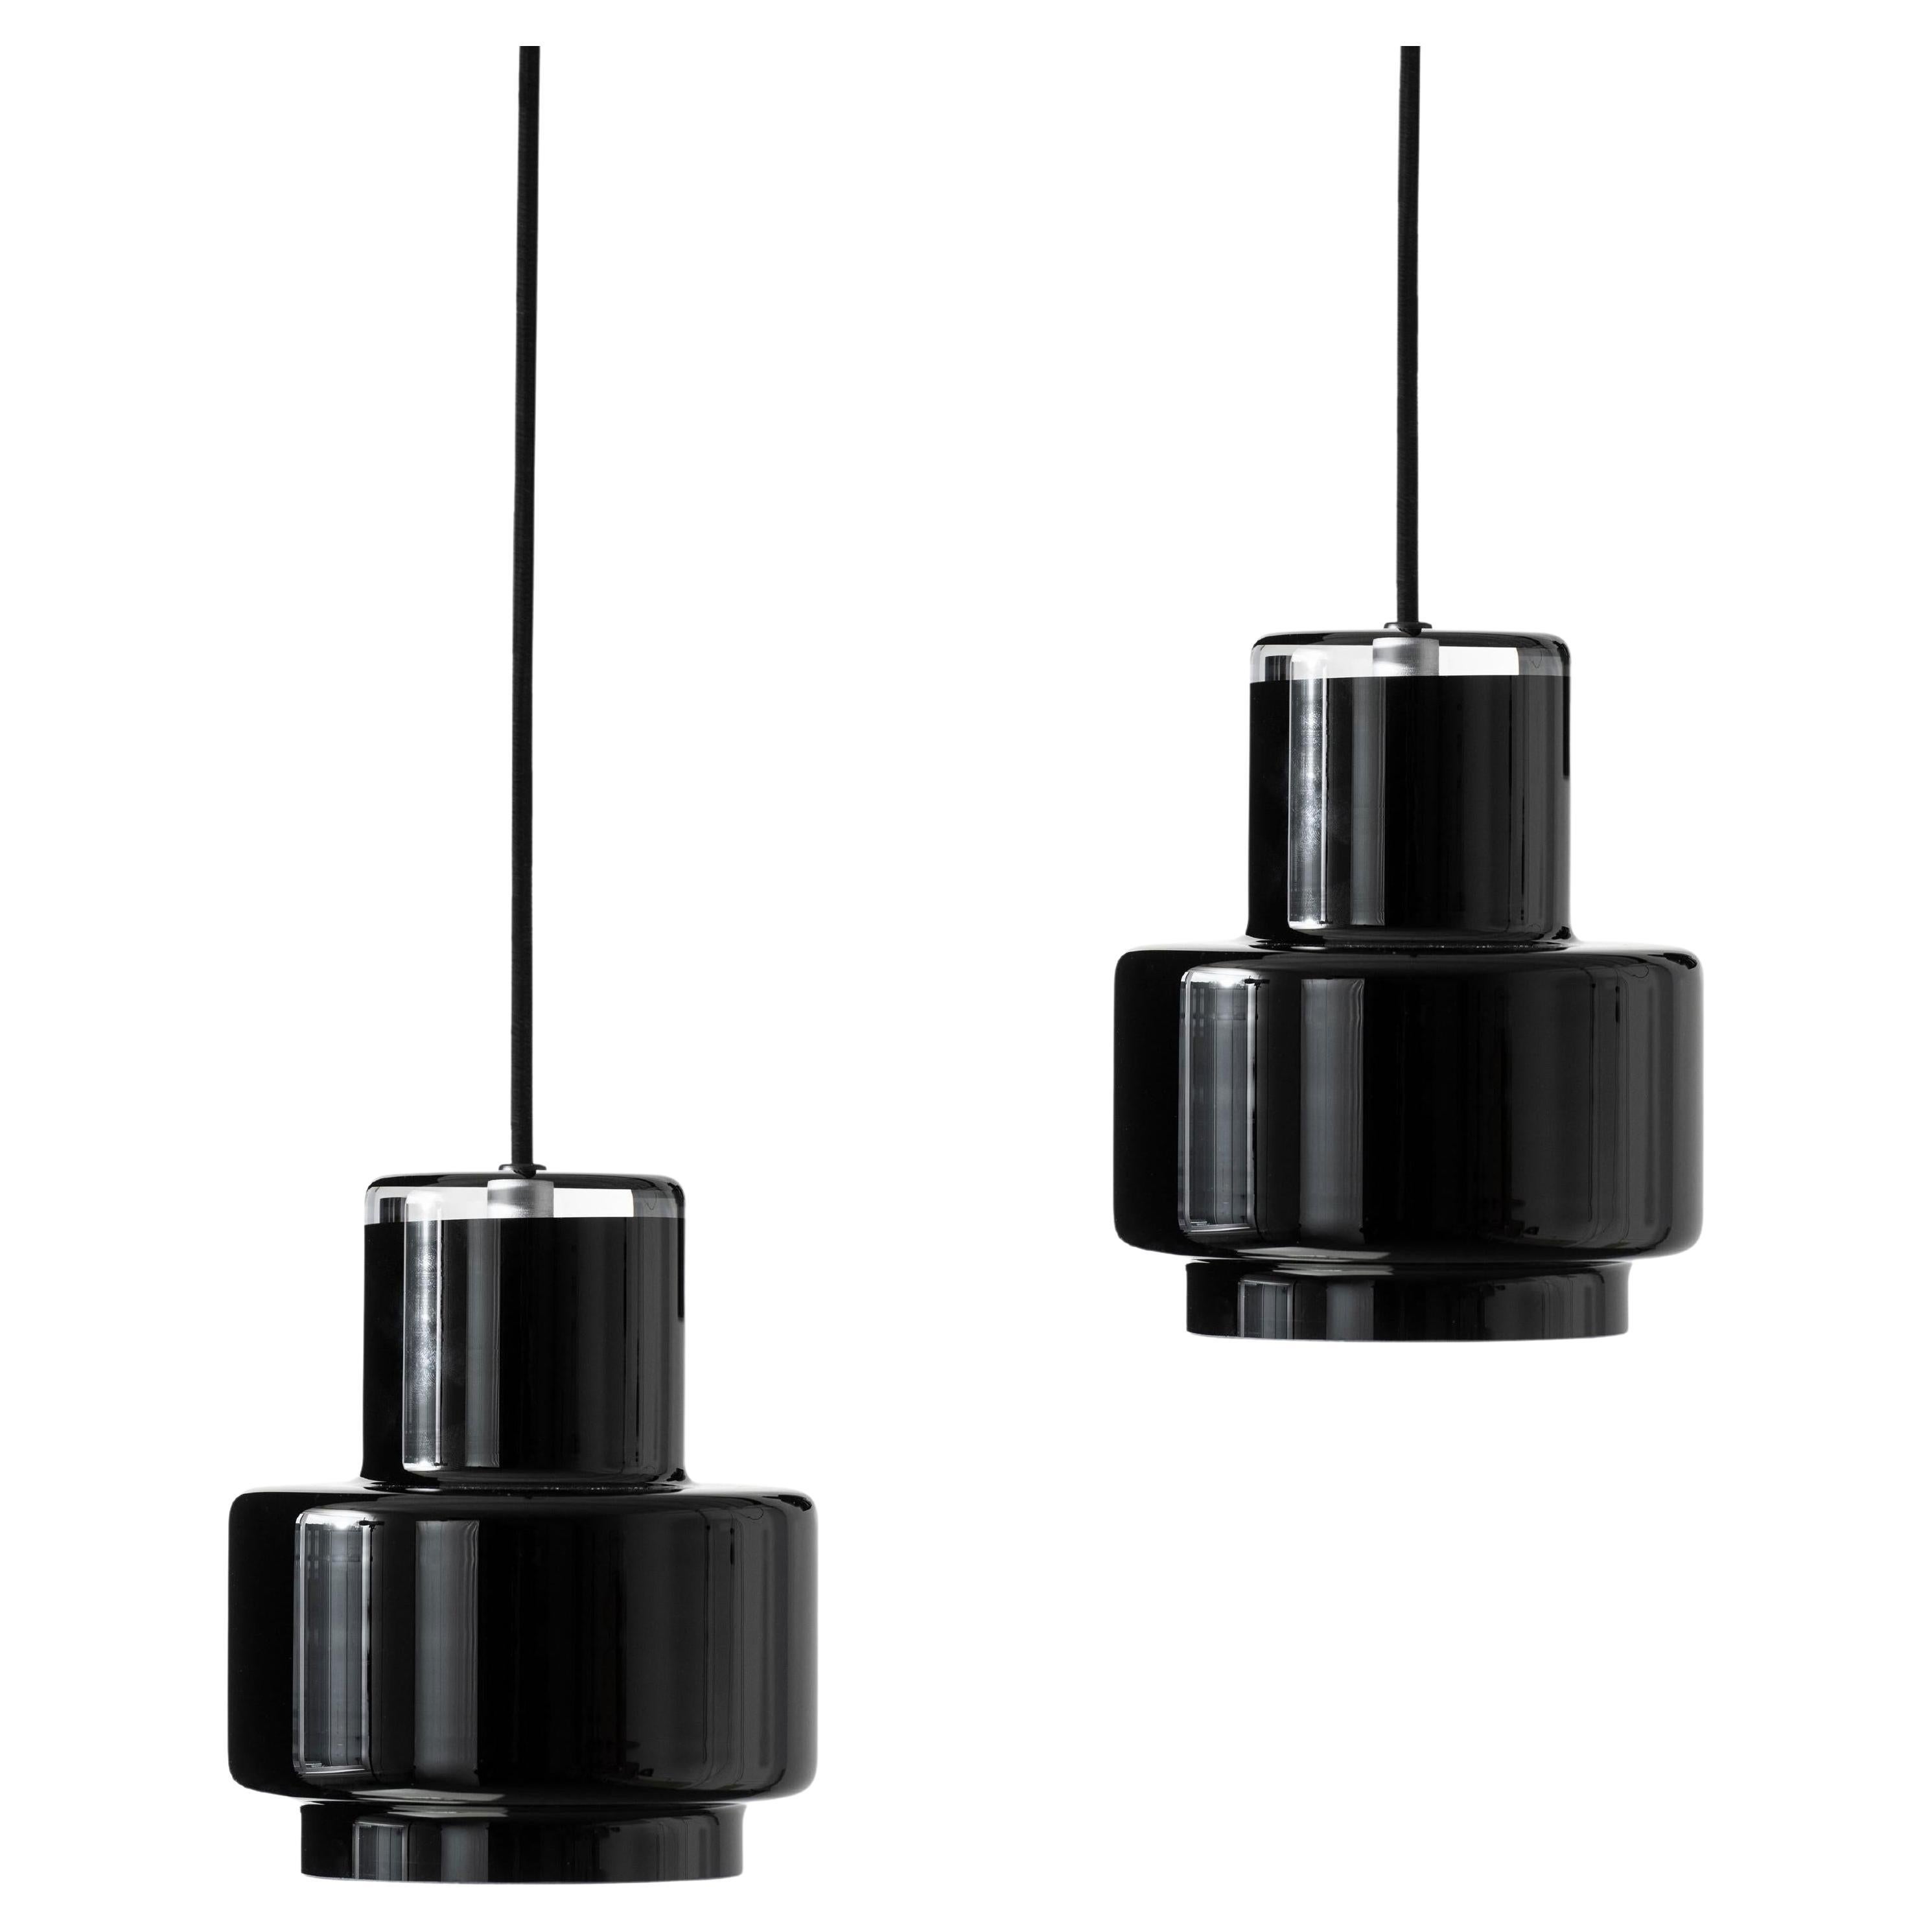 Pair of 'Multi S' Glass Pendants in Black by Jokinen and Konu for Innolux